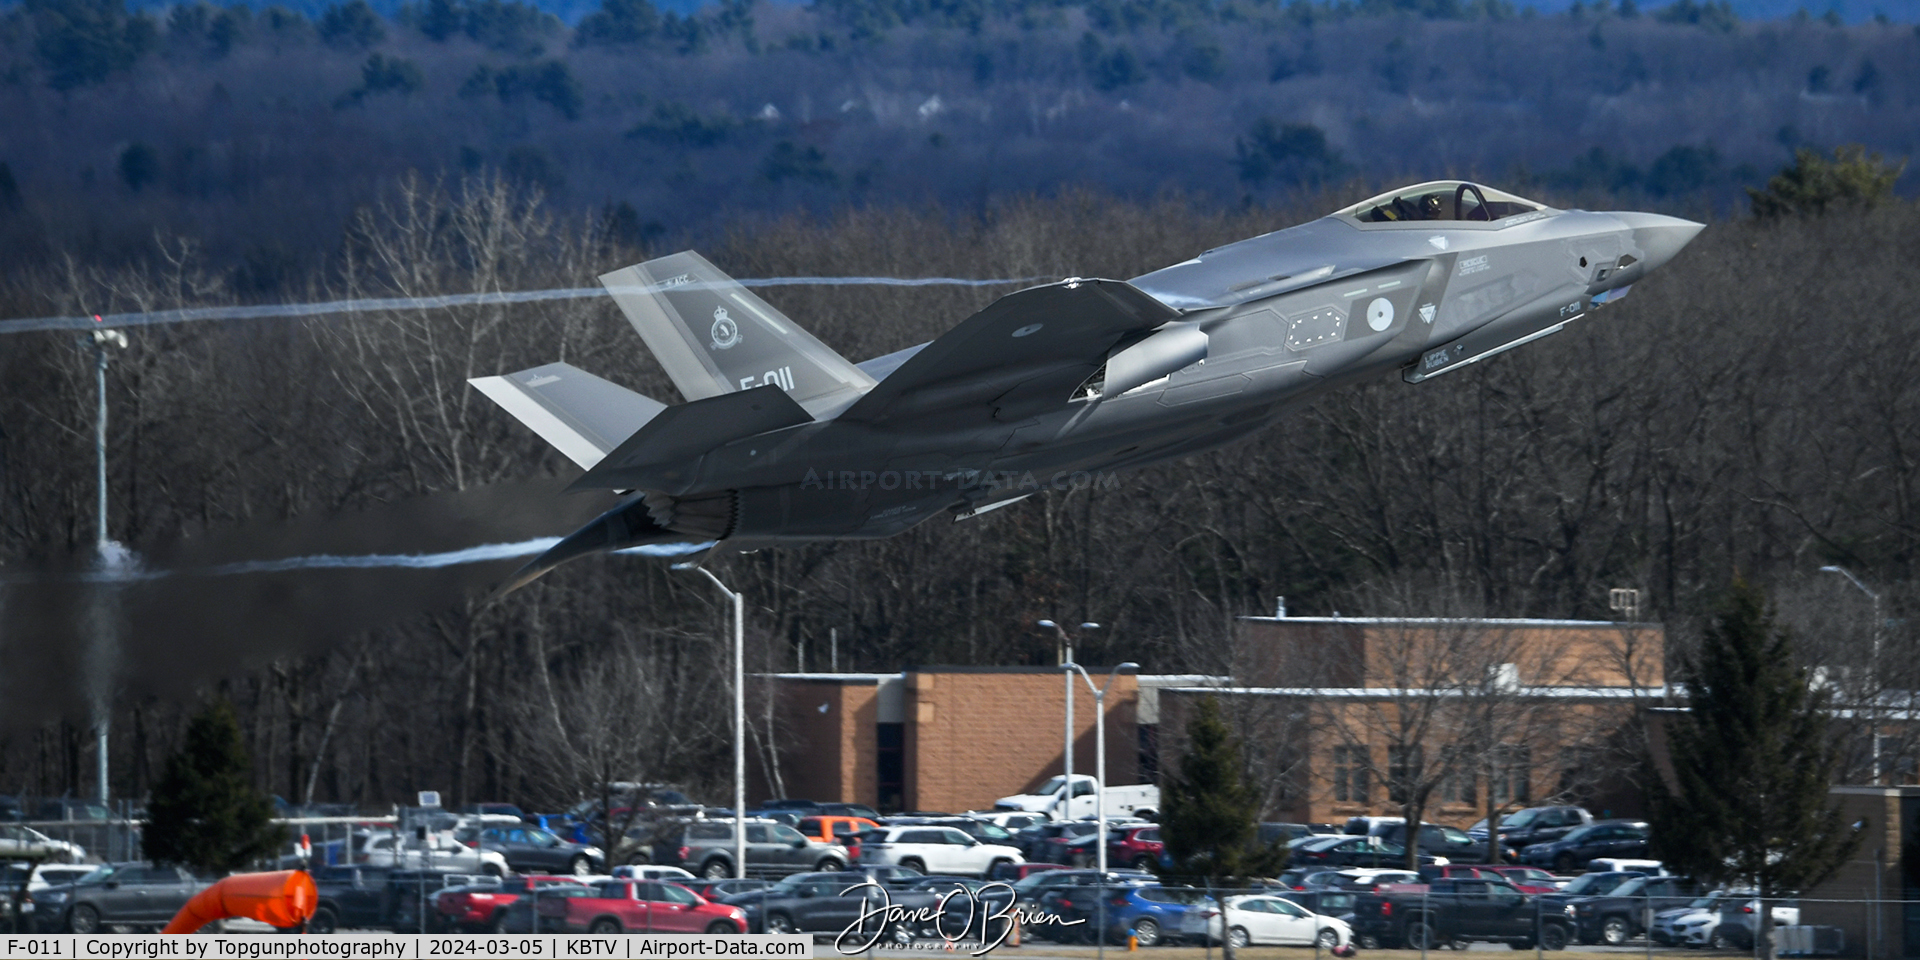 F-011, 2020 Lockheed Martin F-35A Lightning II C/N AN-11, NAF326 1st Dutch 35 departing VT for Red Flag 24-2 wagging its wings to their host 158th FW unit.